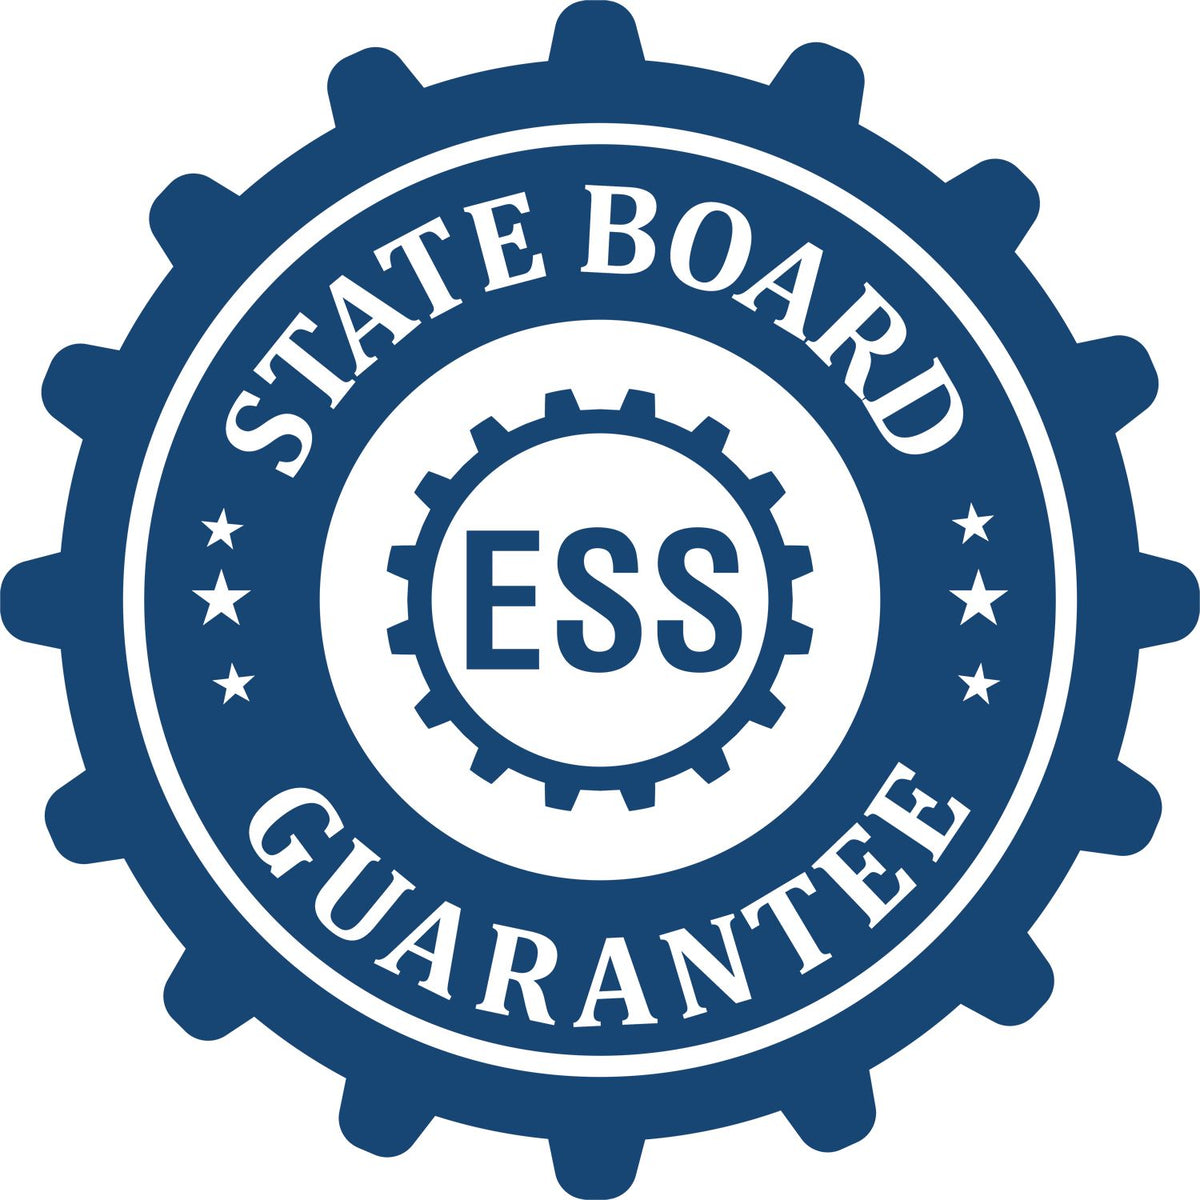 An emblem in a gear shape illustrating a state board guarantee for the State of Arkansas Extended Long Reach Geologist Seal